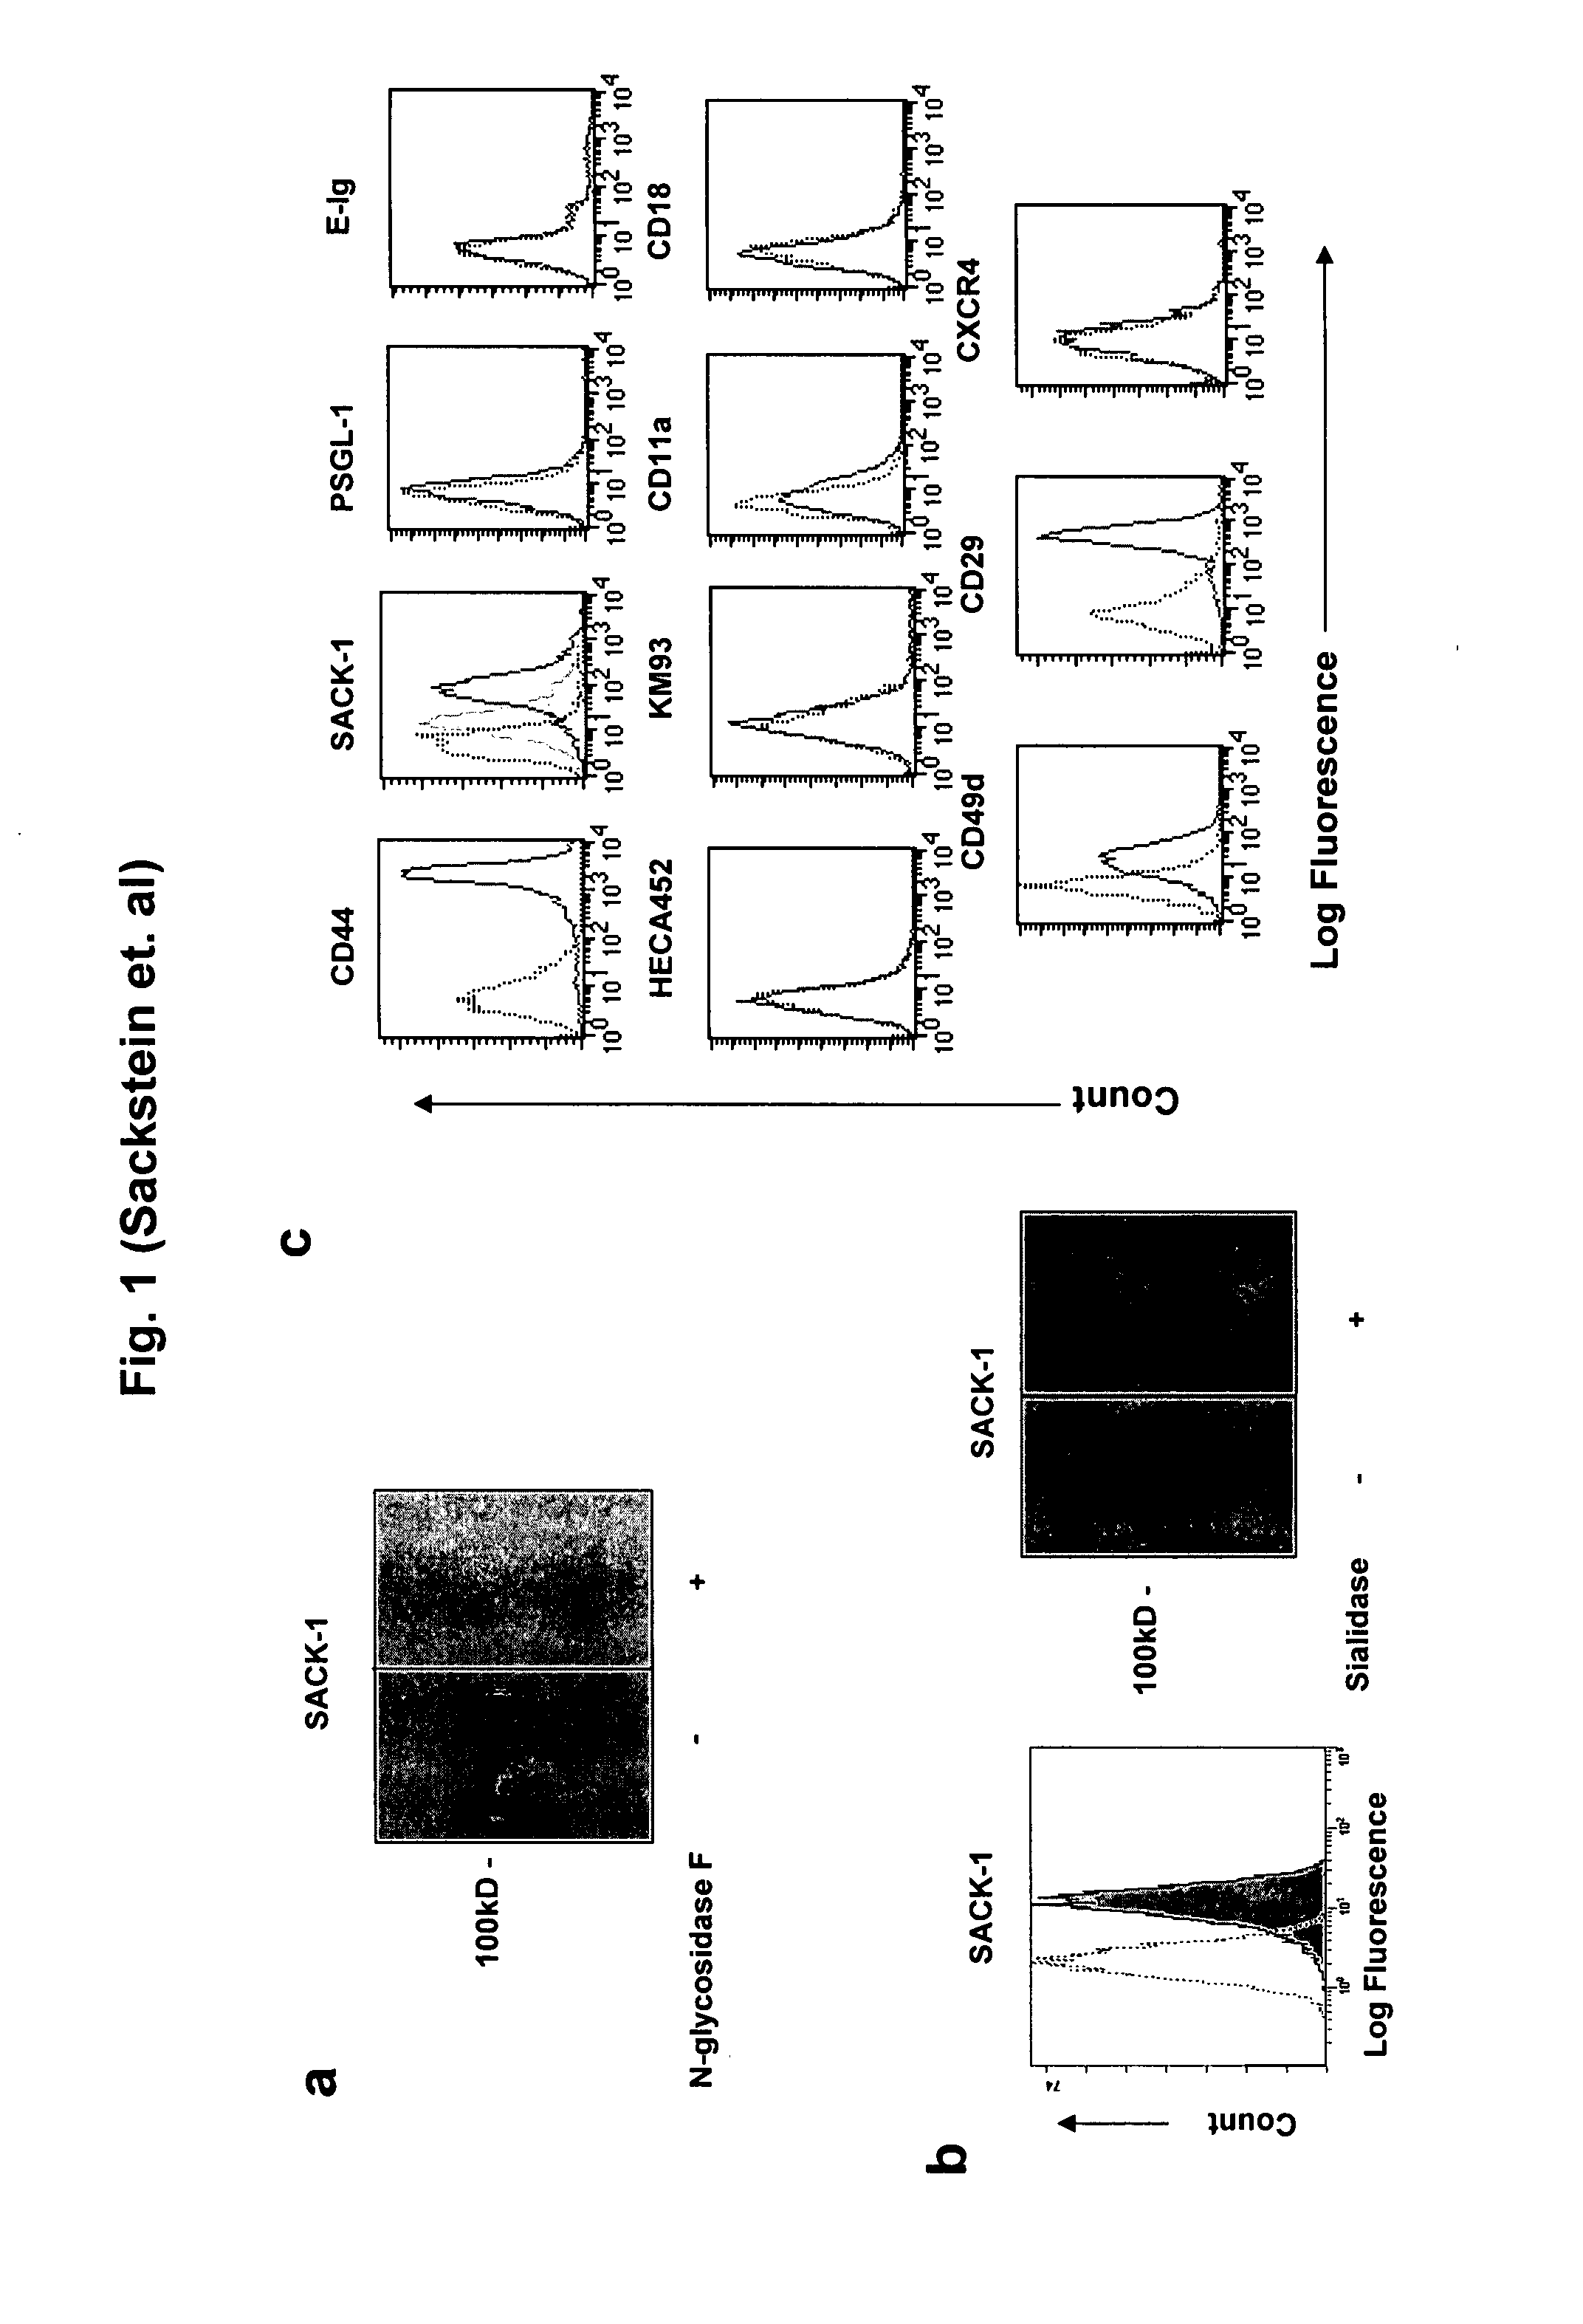 Compositions and methods for modifying cell surface glycans